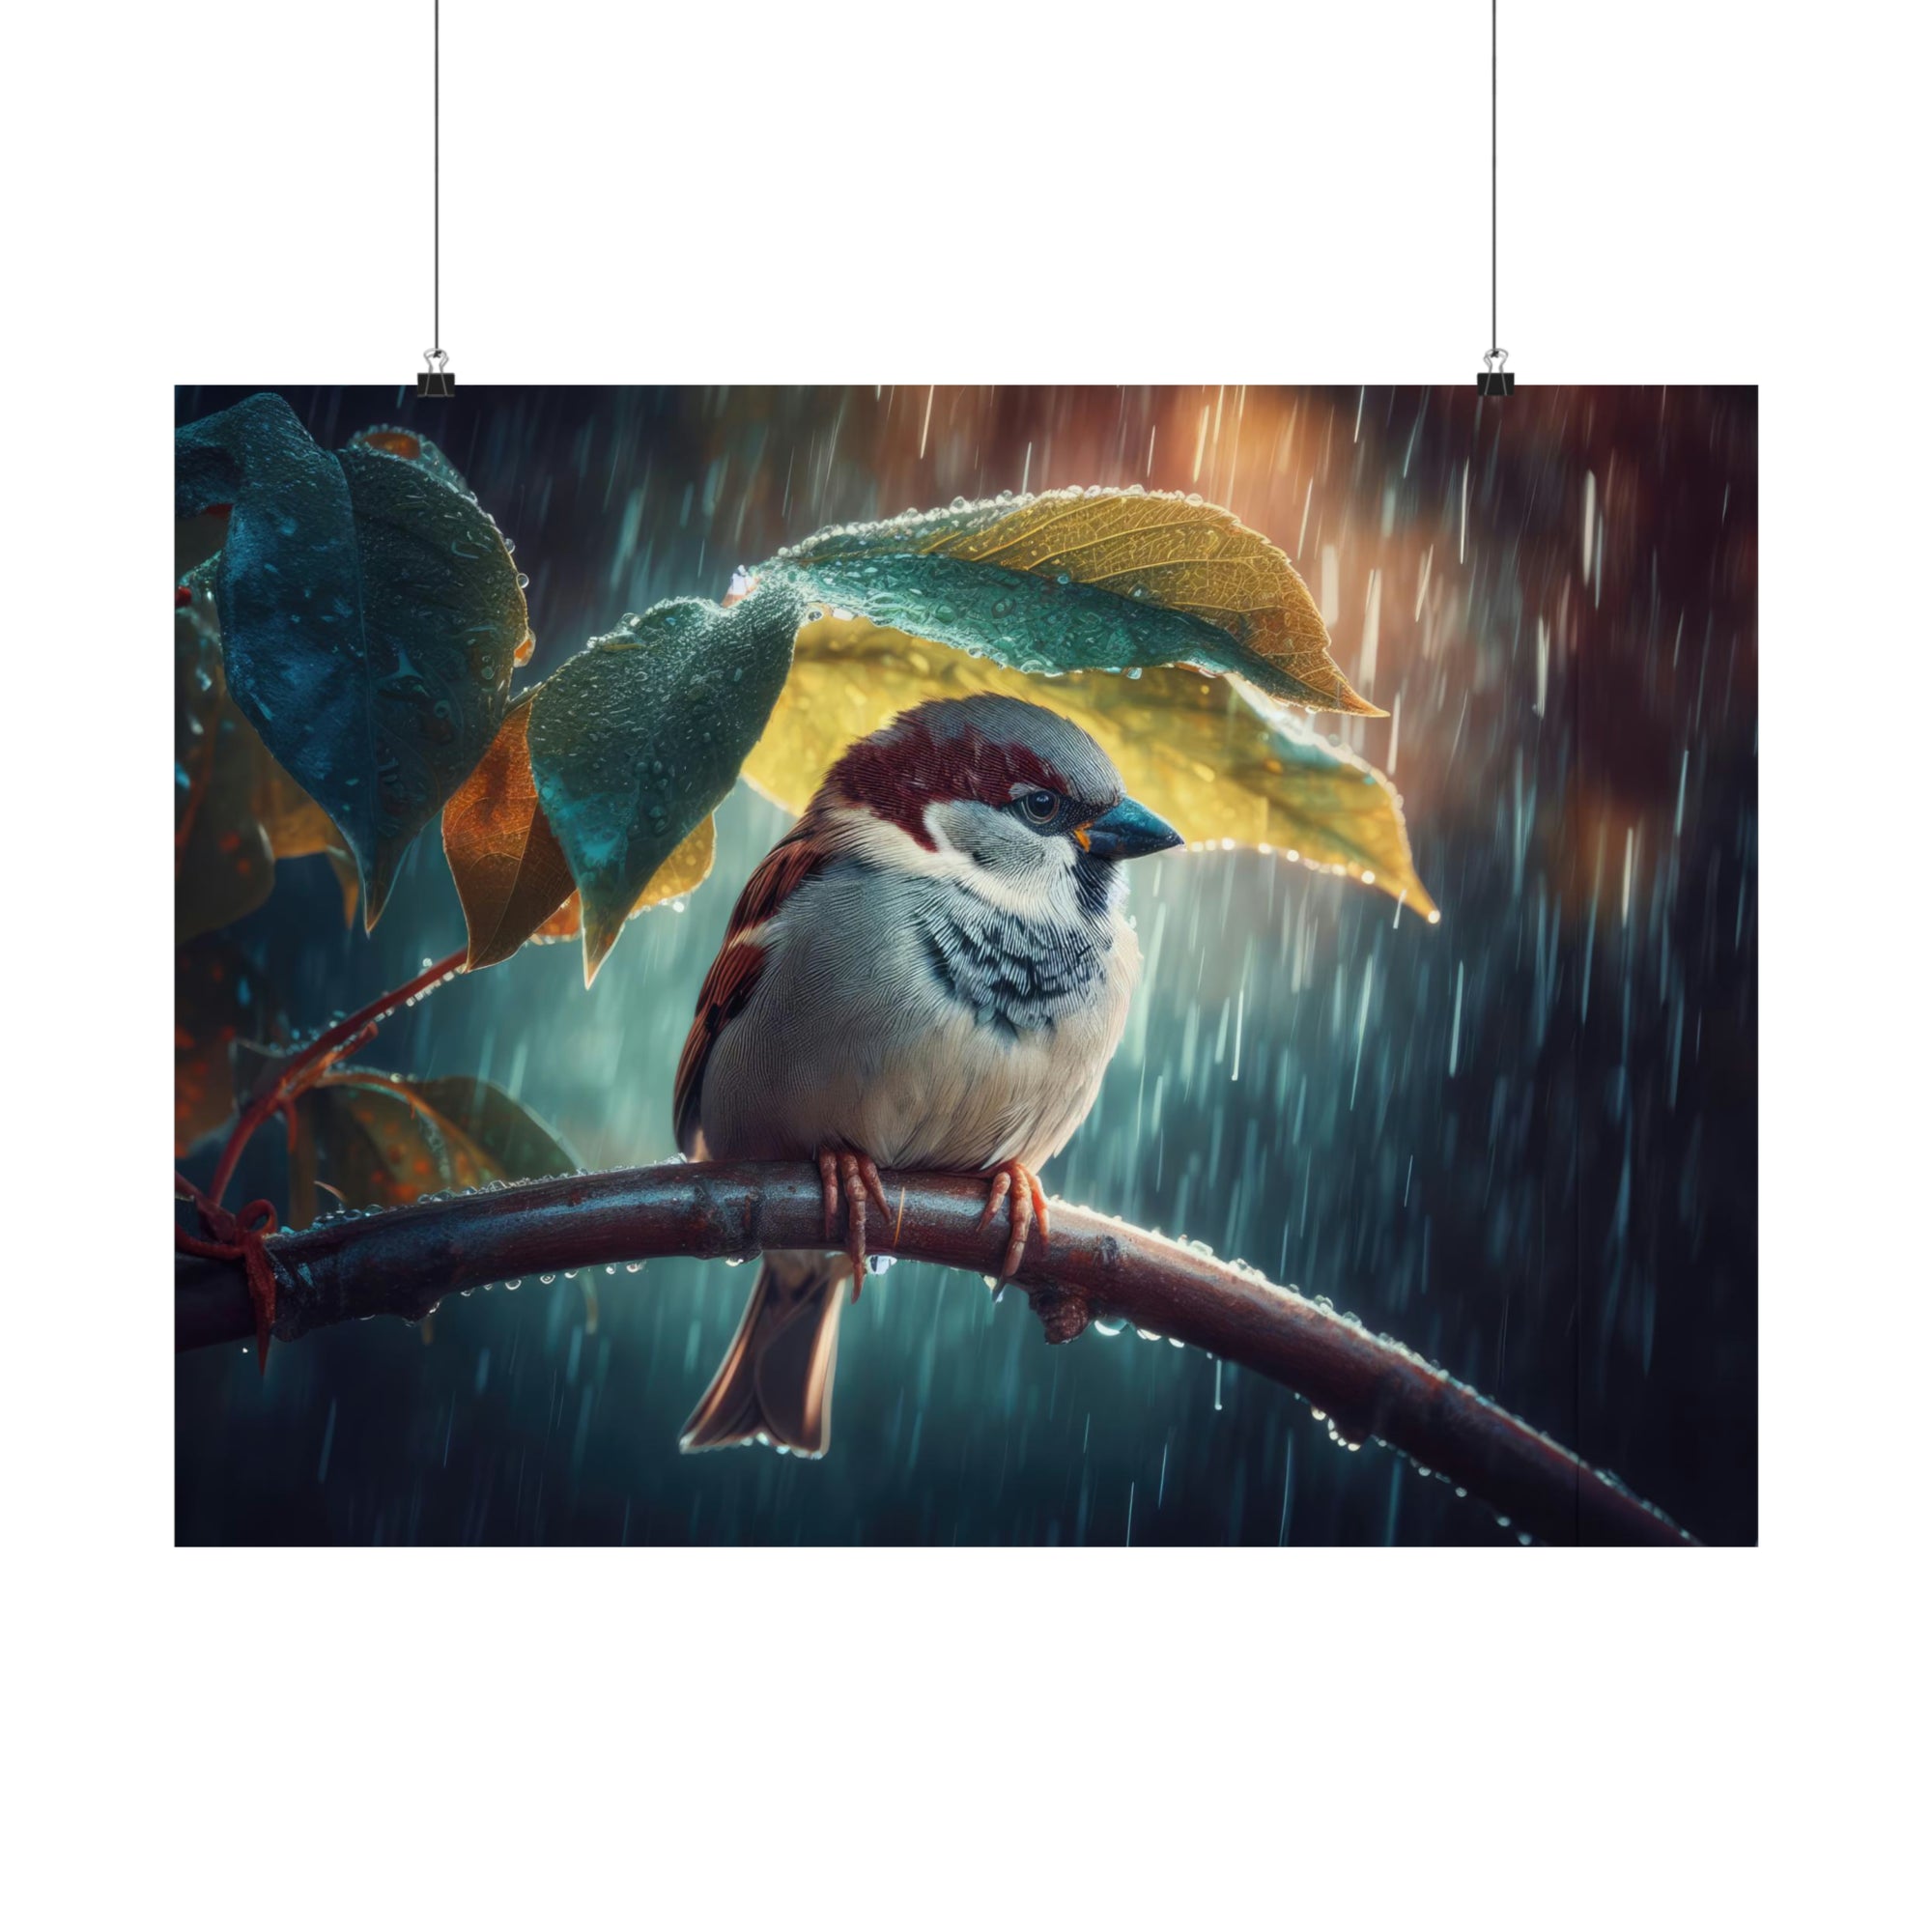 Sparrow's Leafy Sanctuary in the Rainy Chill Poster